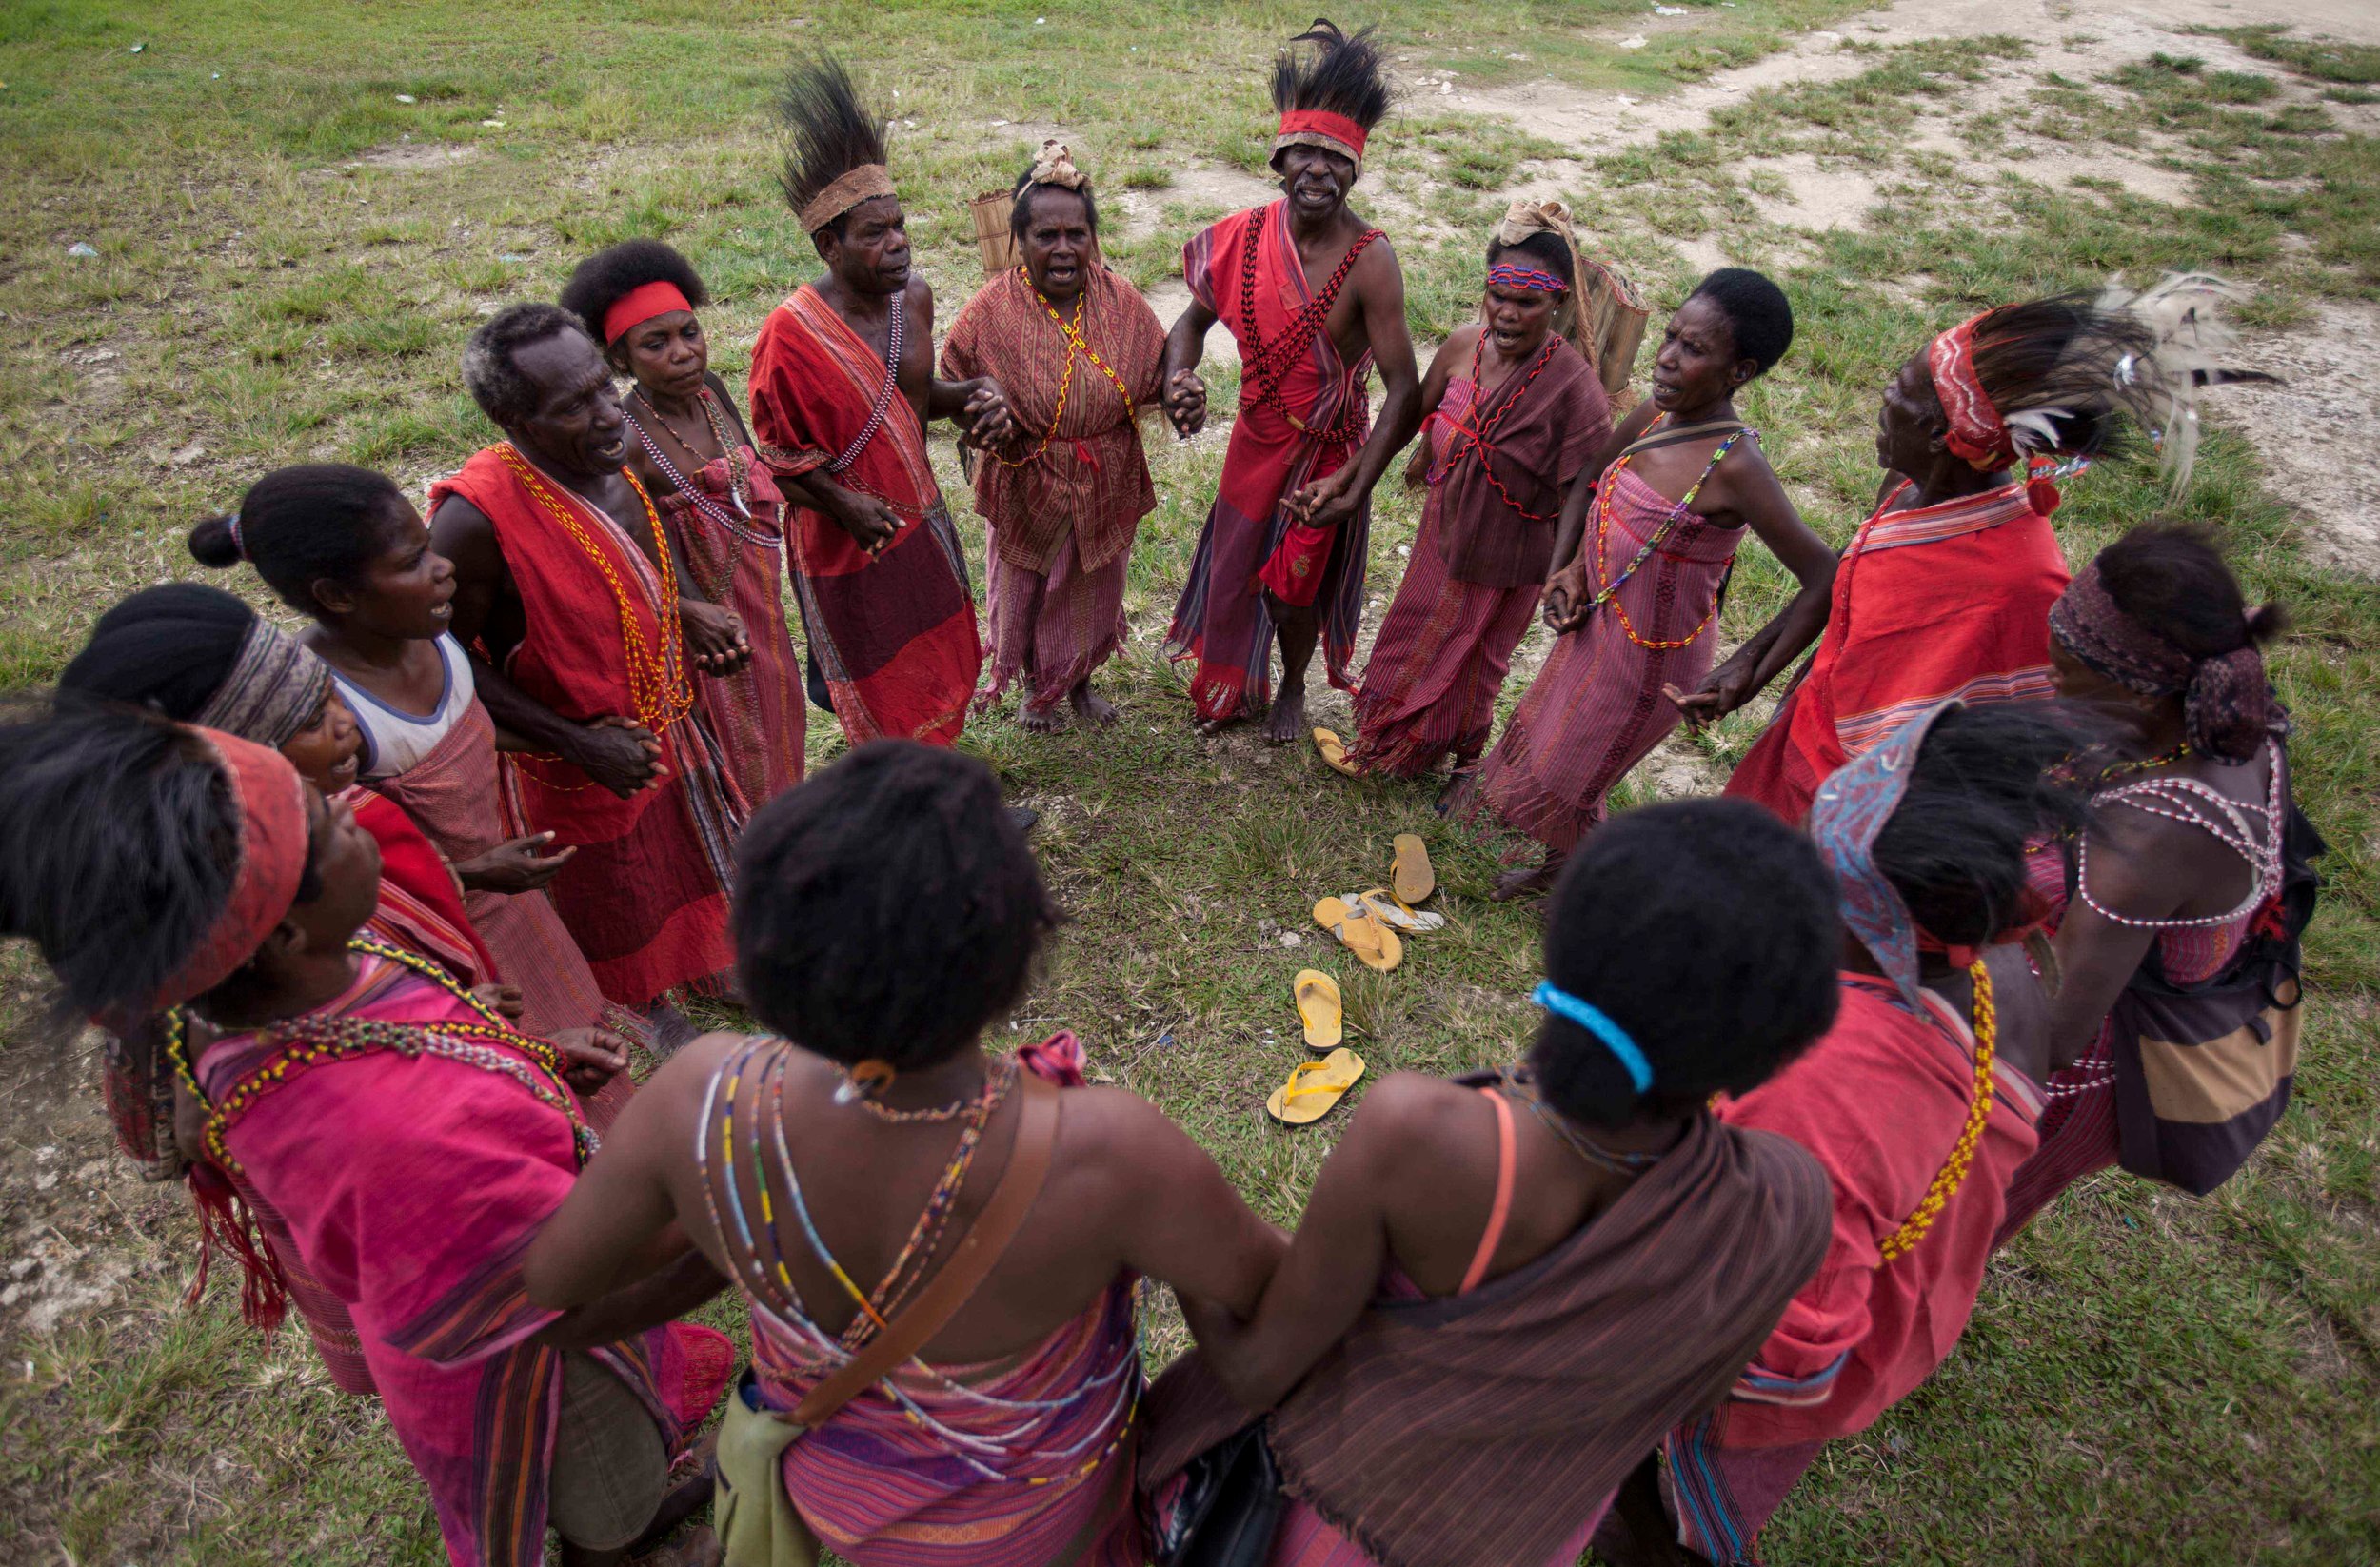 Papuanese from the Tehit tribe dance during the traditional ceremony in Teminabuan, South Sorong, West Papua. Two villages in South Sorong, Mangroholo and Sira, officially received a permit from the government to manage social forestry in their area. Photo: Greenpeace